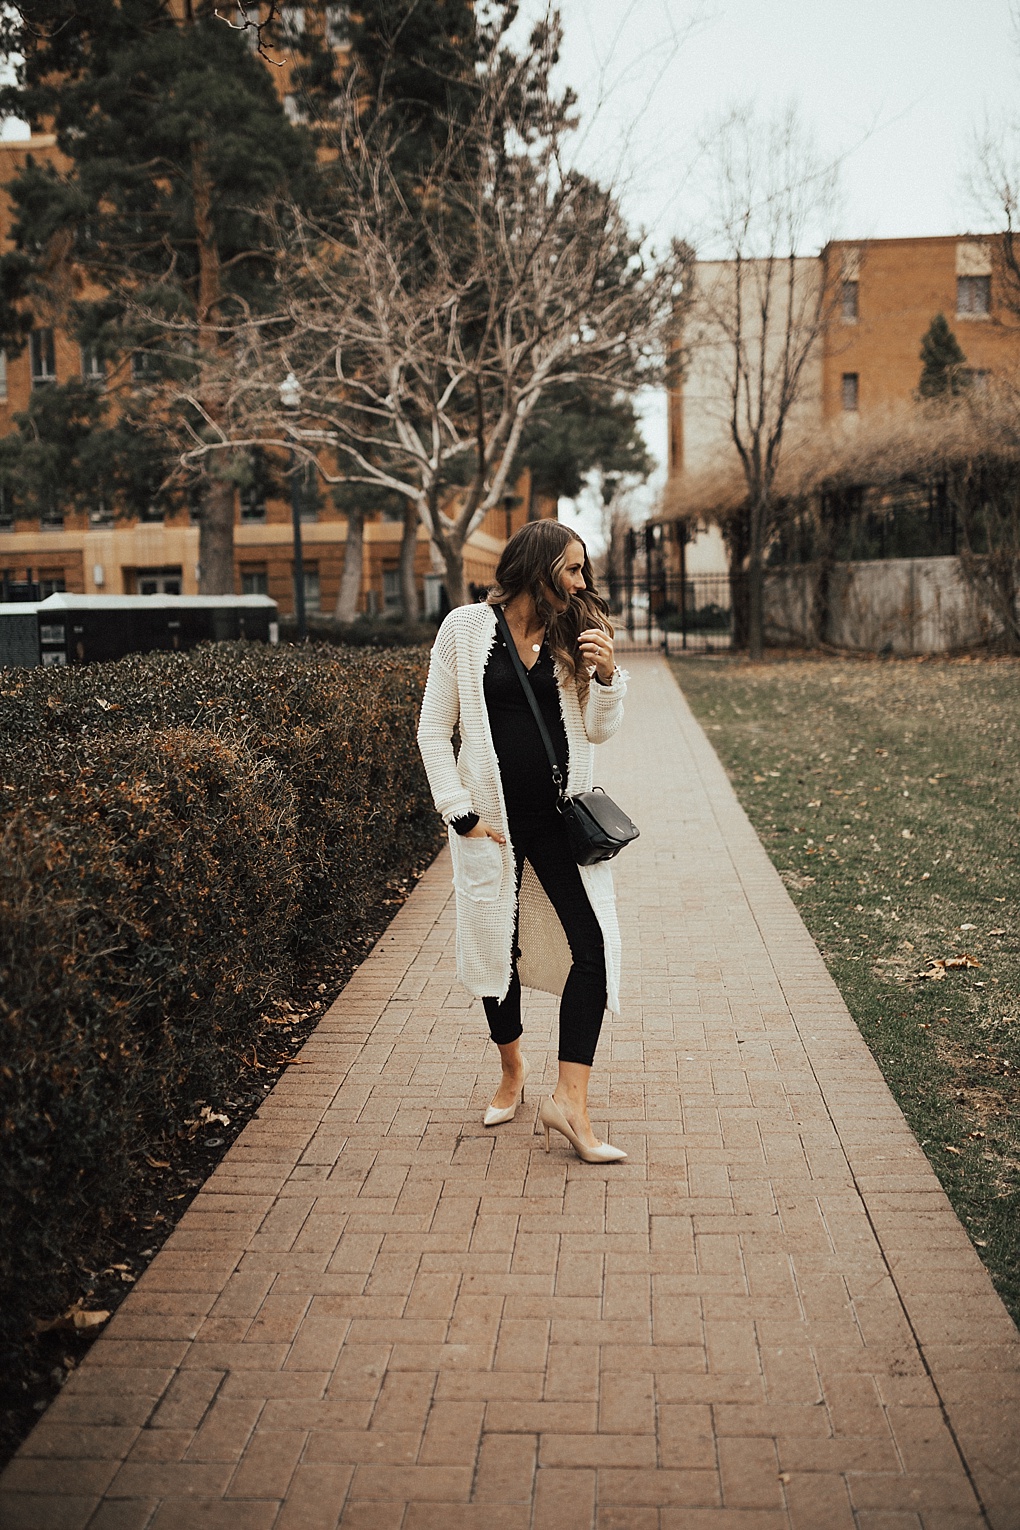 Bookmark this post ASAP! Utah Style Blogger Dani Marie shares her top tips on how to dress up a duster cardigan for Spring!